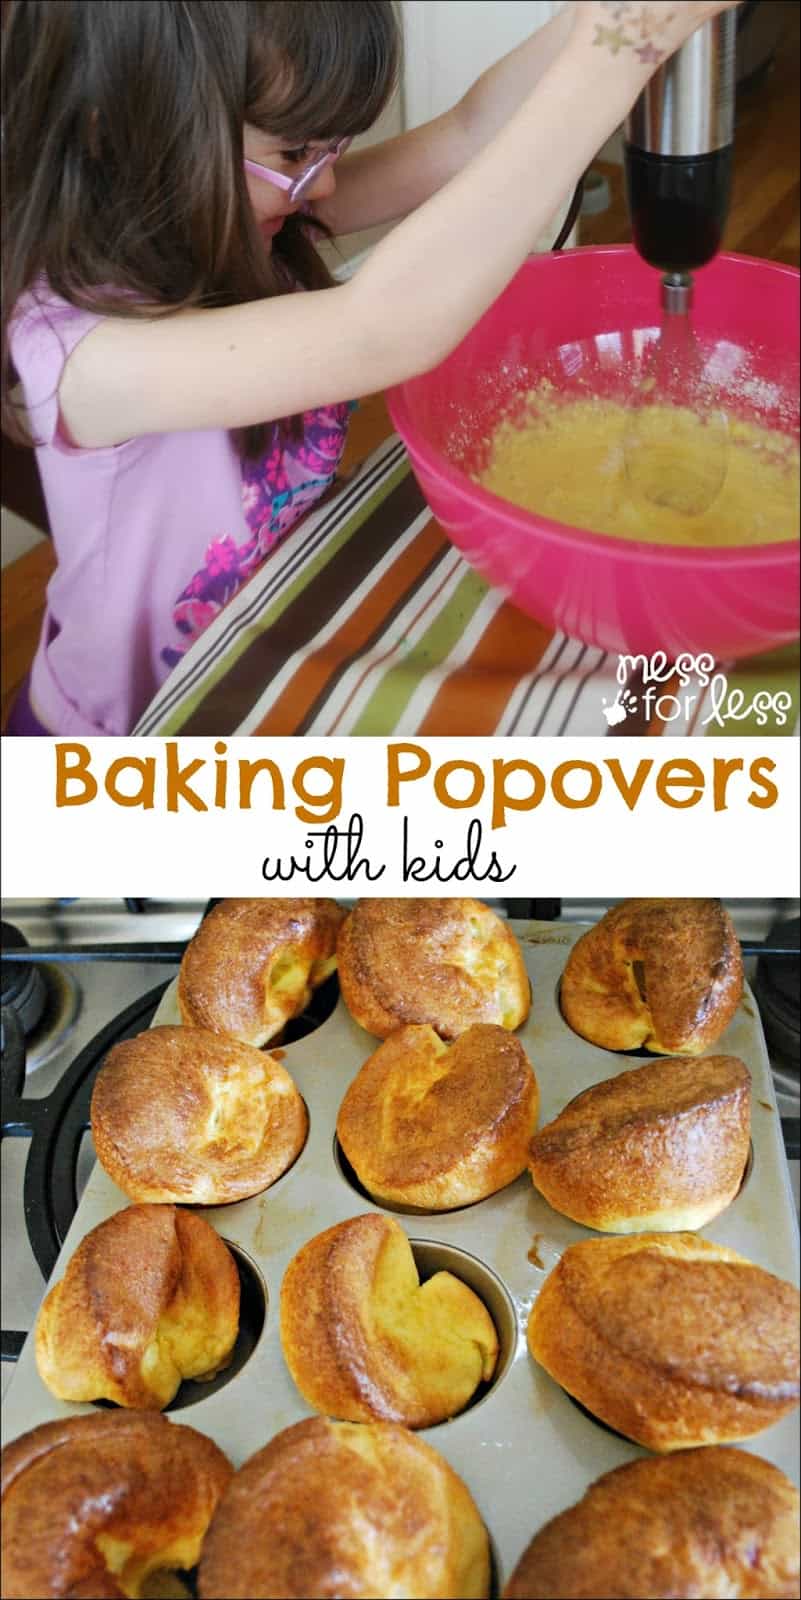 Baking Popovers with Kids - Popovers are simple to make using just a few basic ingredients. They are so yummy and make a fabulous breakfast.